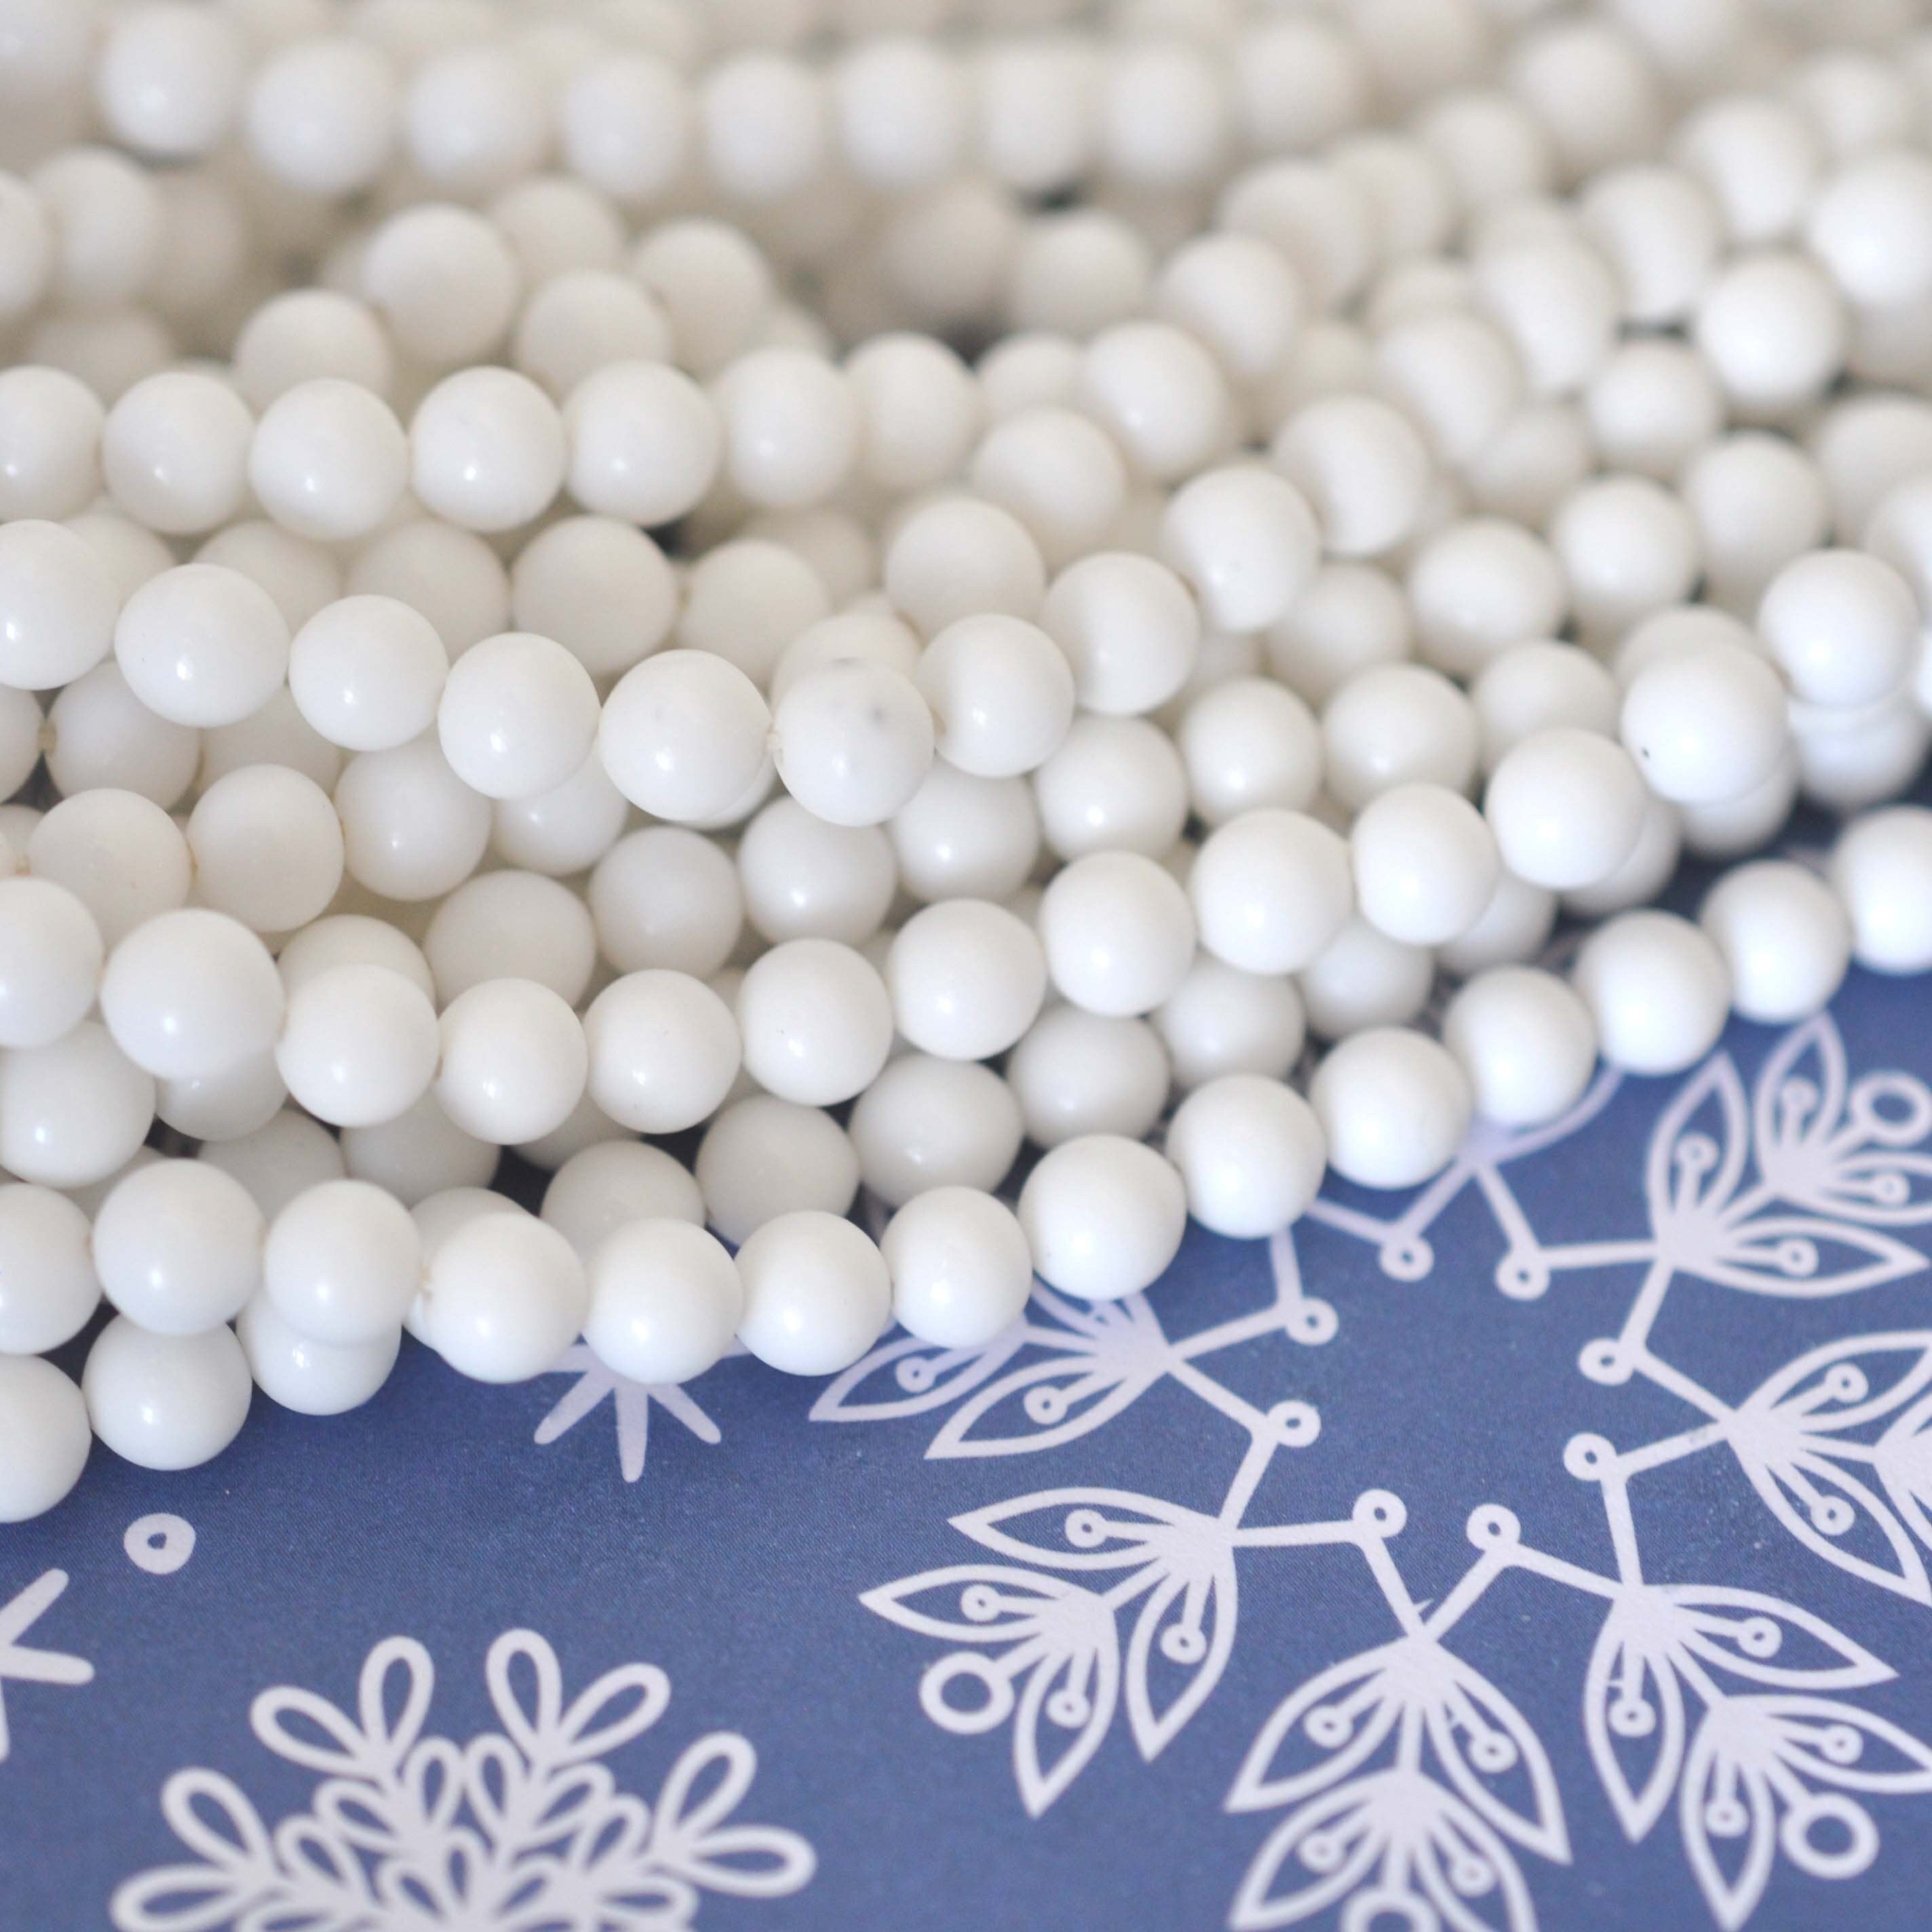 Flurries 6MM White Round Opaque Glass Beads Vintage Cherry Brand - 100 Beads